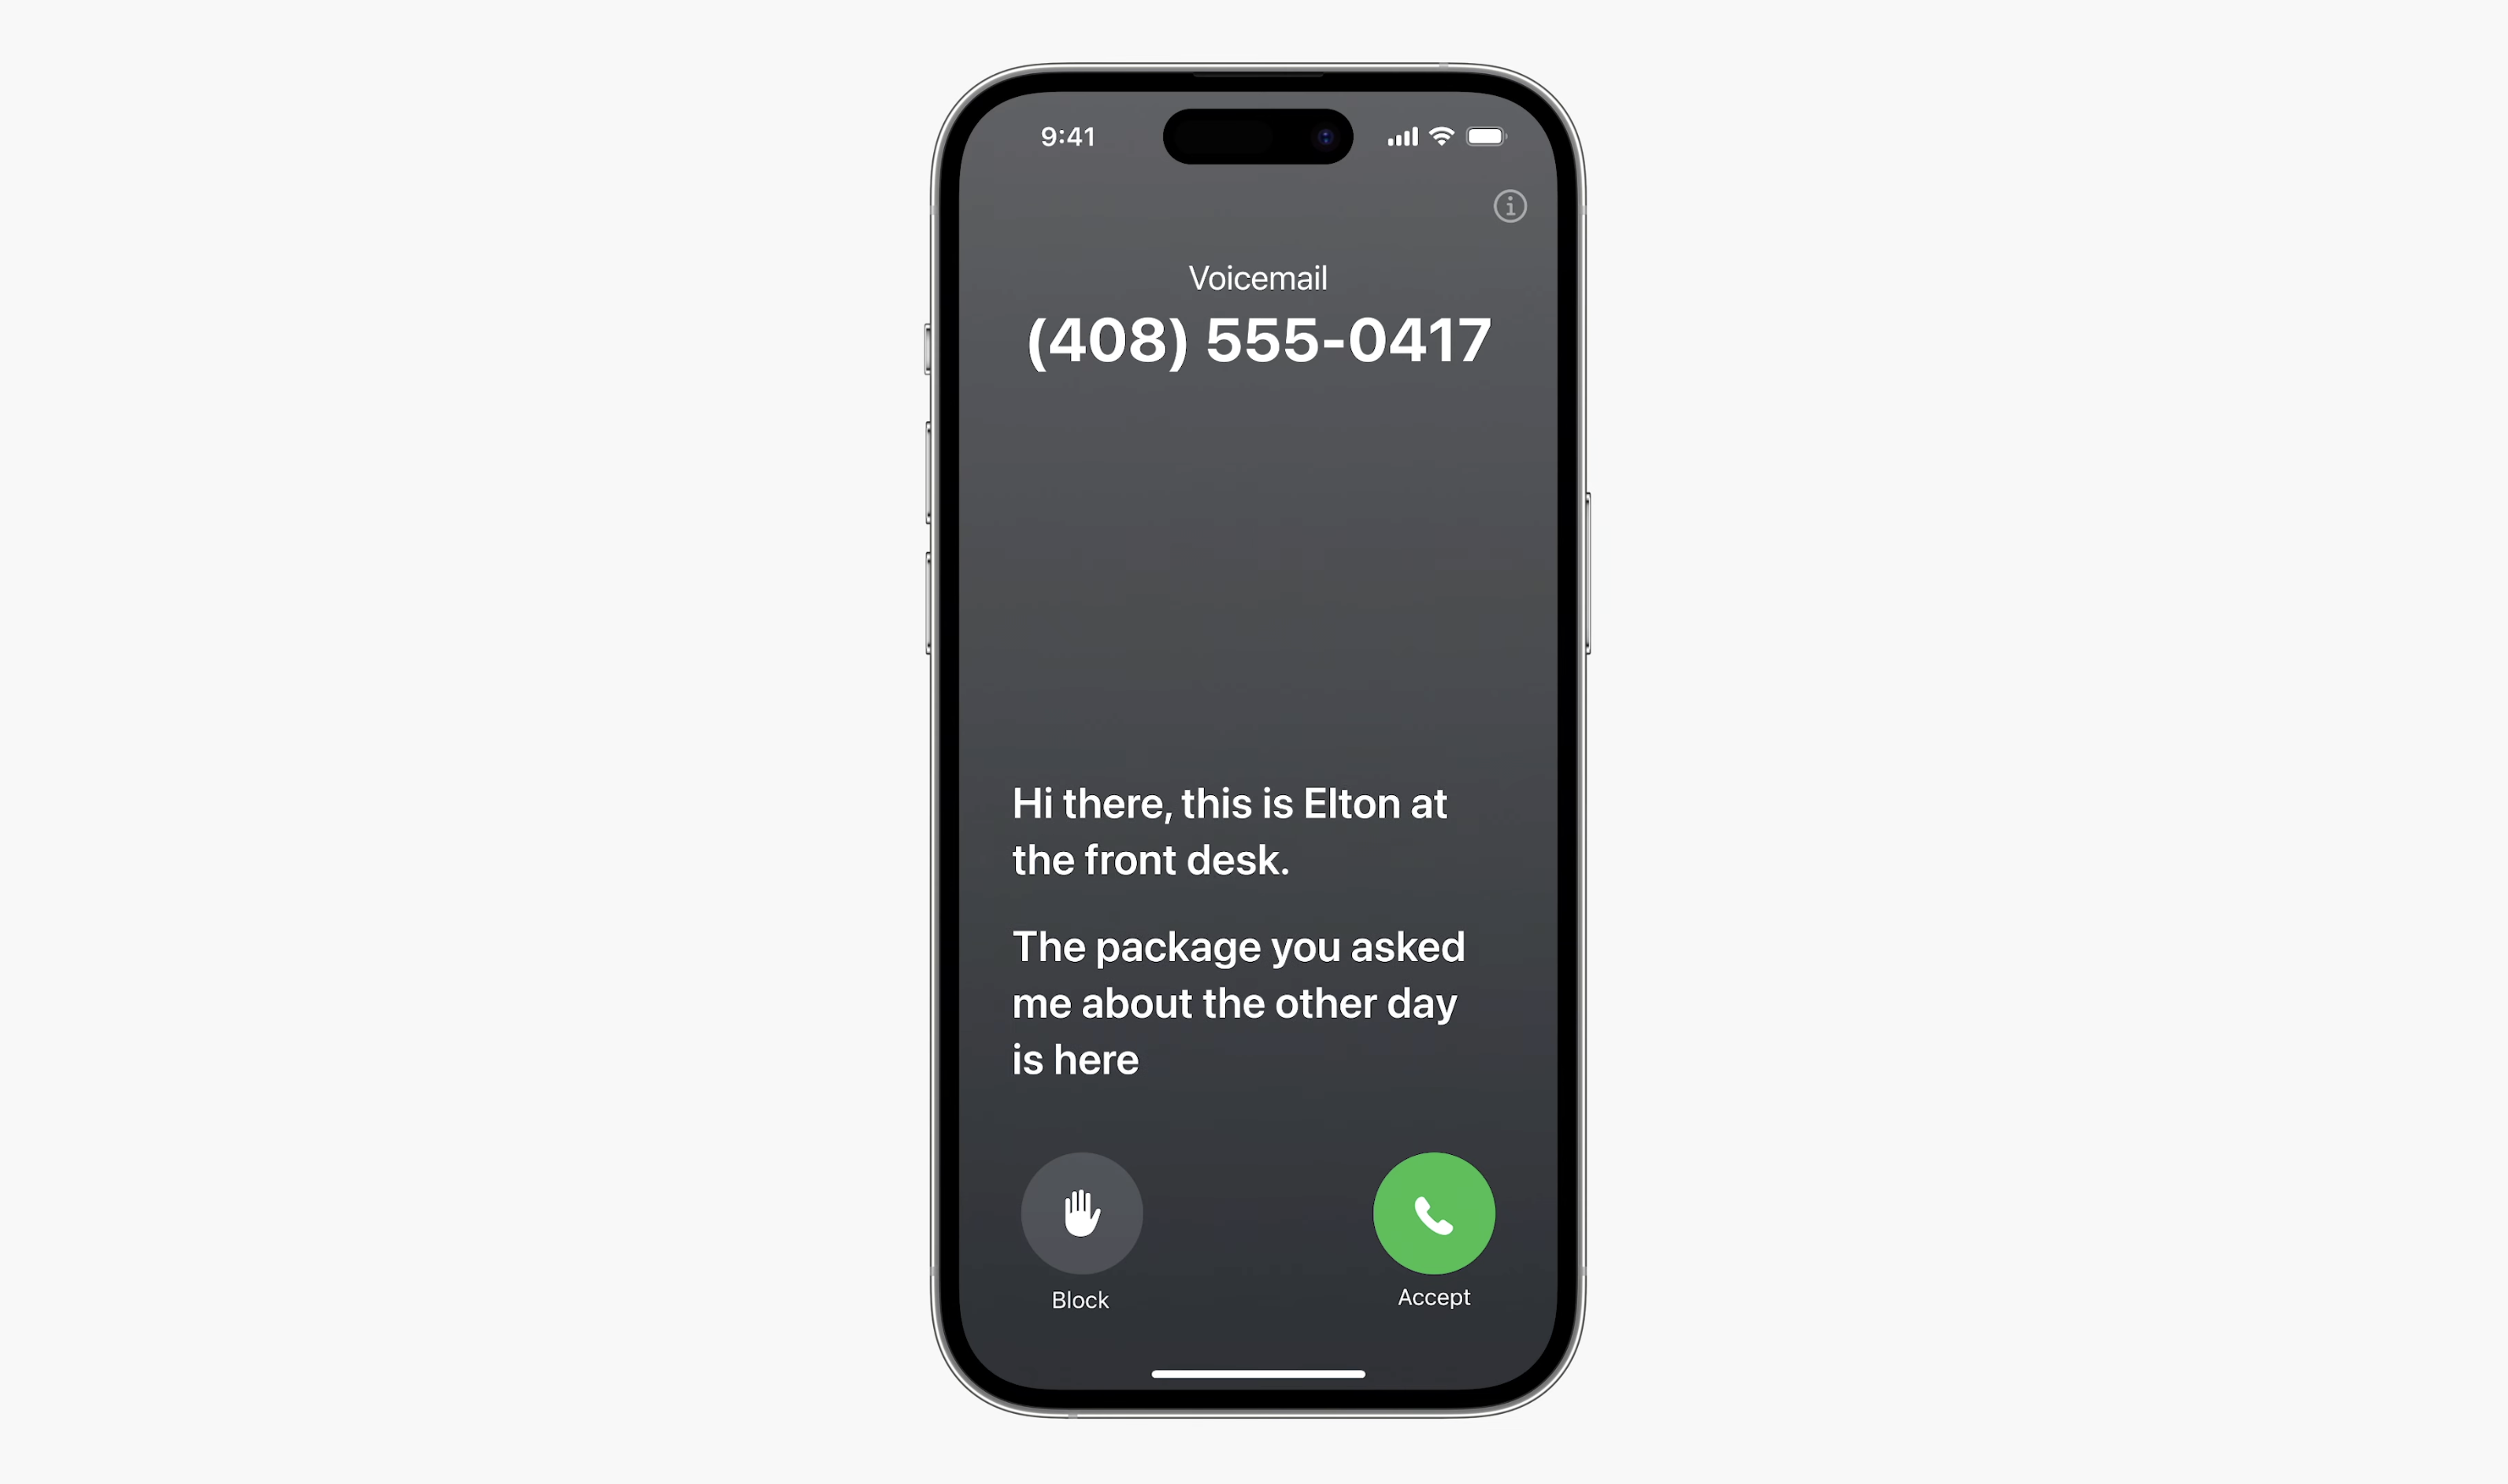 new iphone live voicemail feature 648204dadffe5 sej - WWDC 2023: How Apple Could Revolutionize The Way We Work